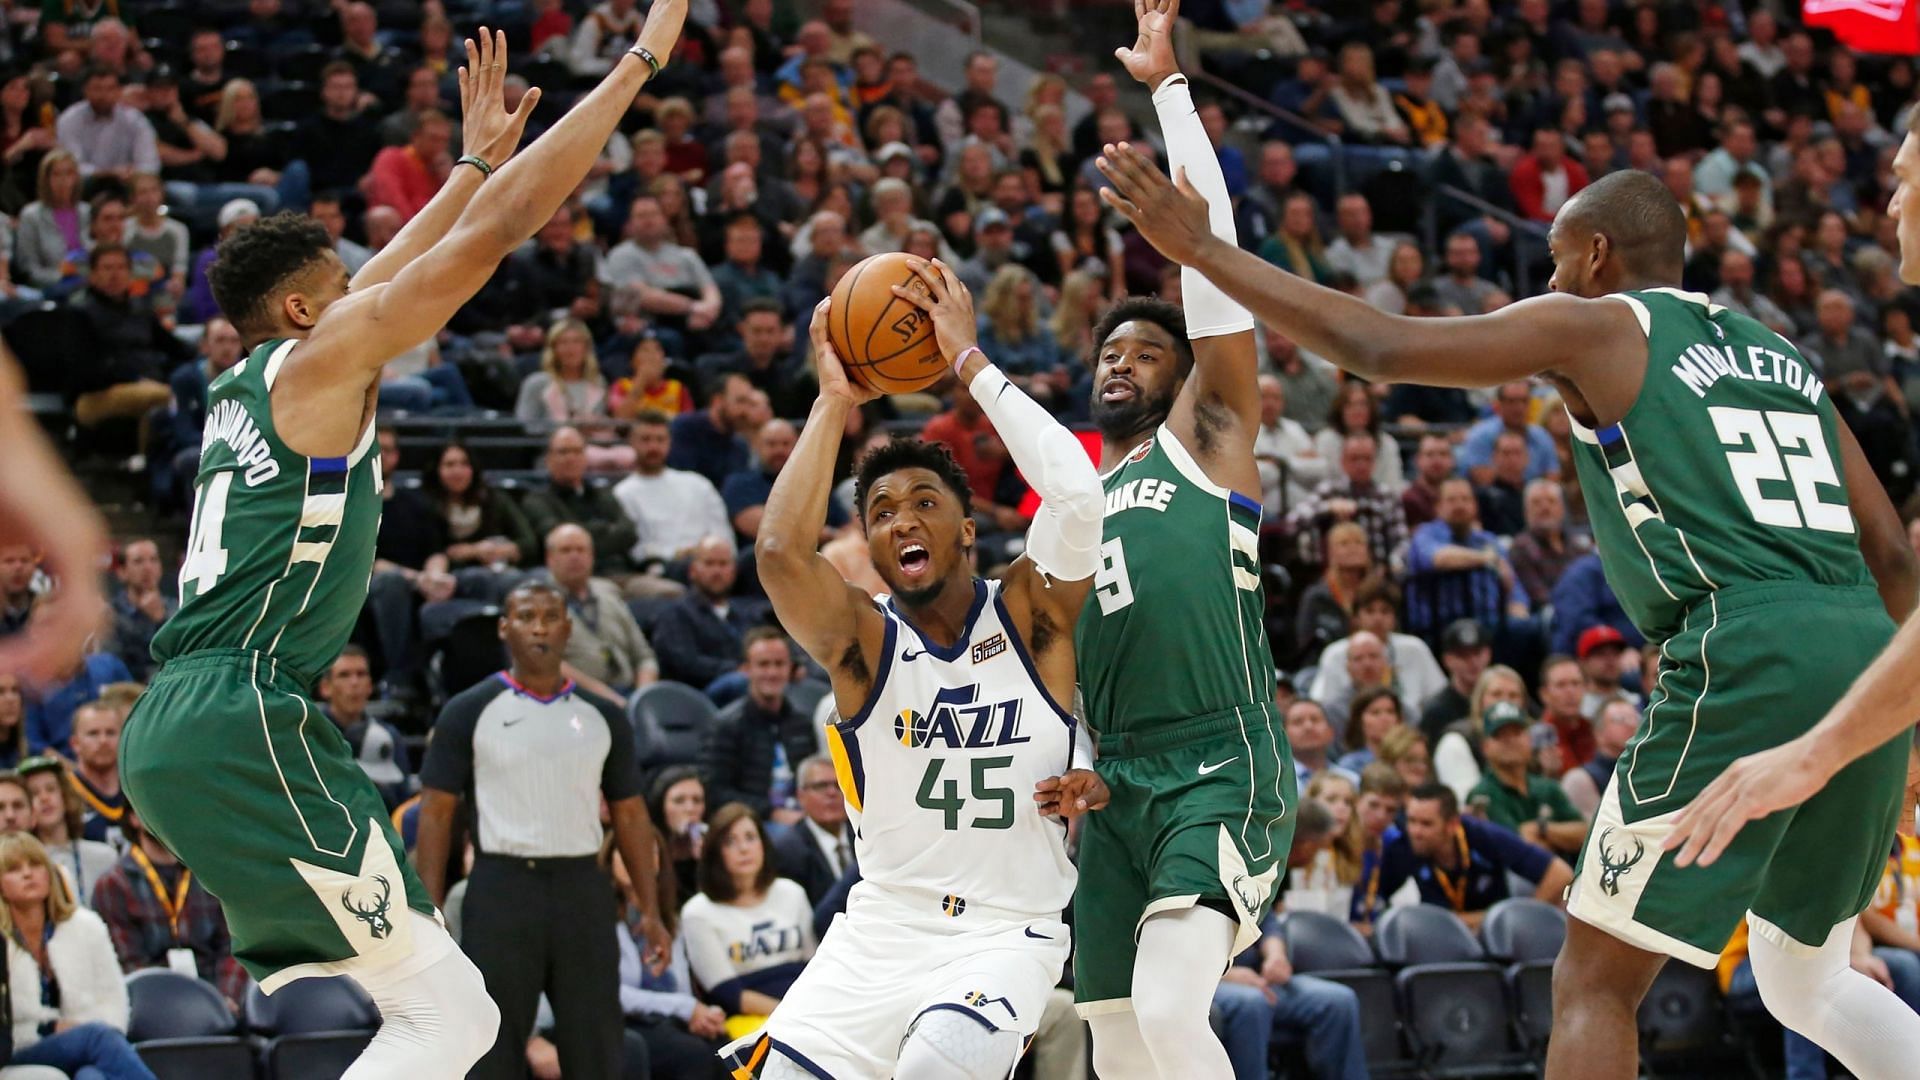 Giannis Antetokounmpo and the Milwaukee Bucks could use Wes Matthews&#039; veteran leadership and locker room presence to defend their NBA championship. [Photo: WVNS]